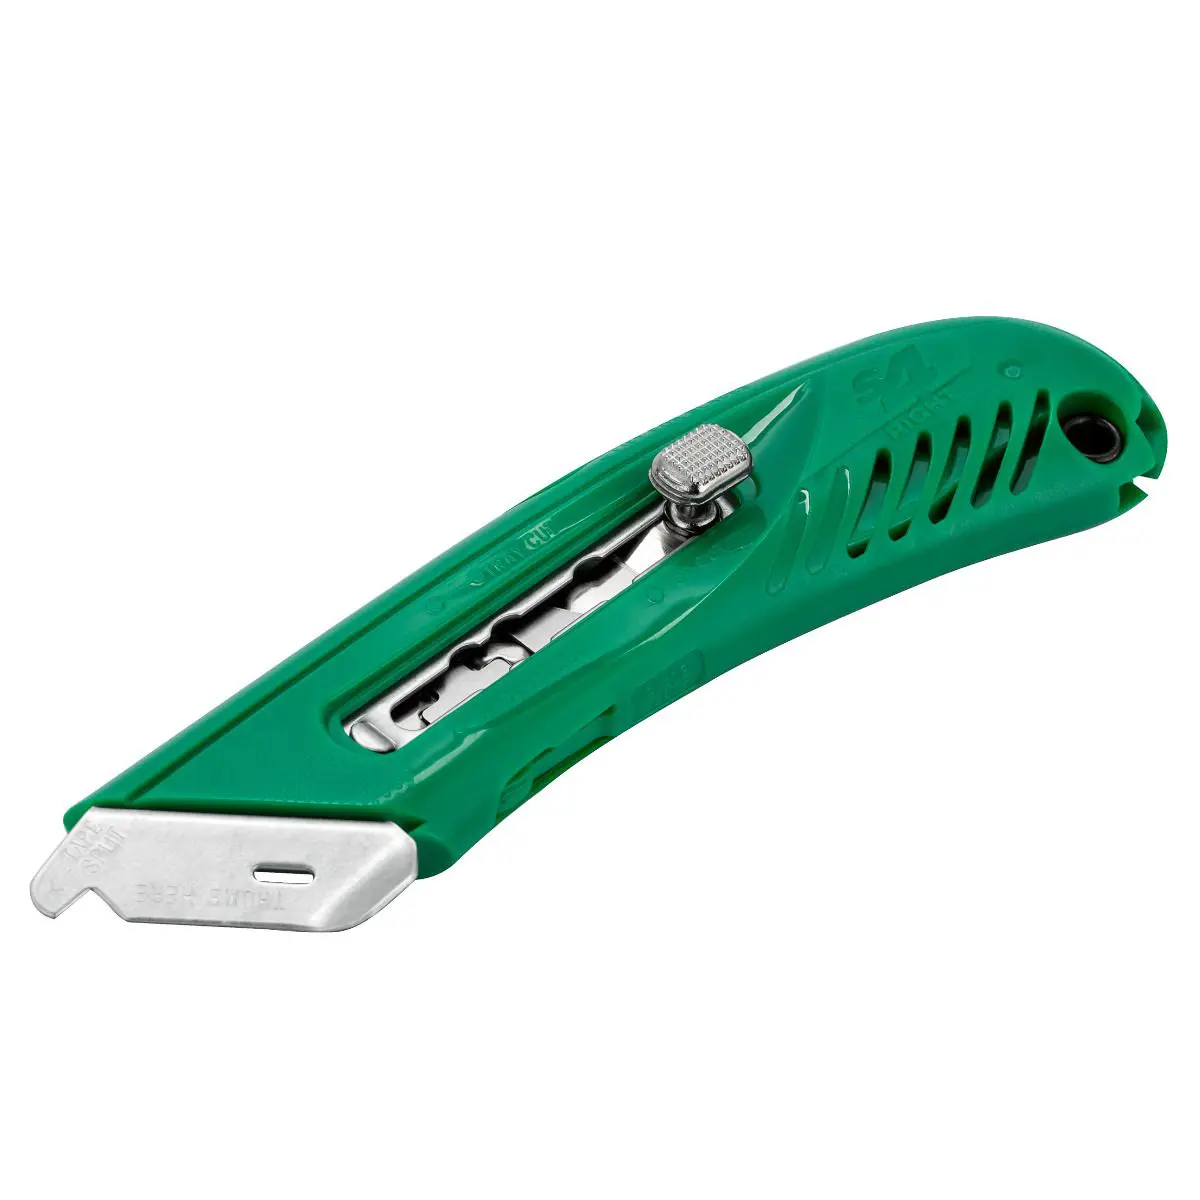 PACIFIC HANDY CUTTER, INC Safety Knife, Fixed Blade, Safety Point